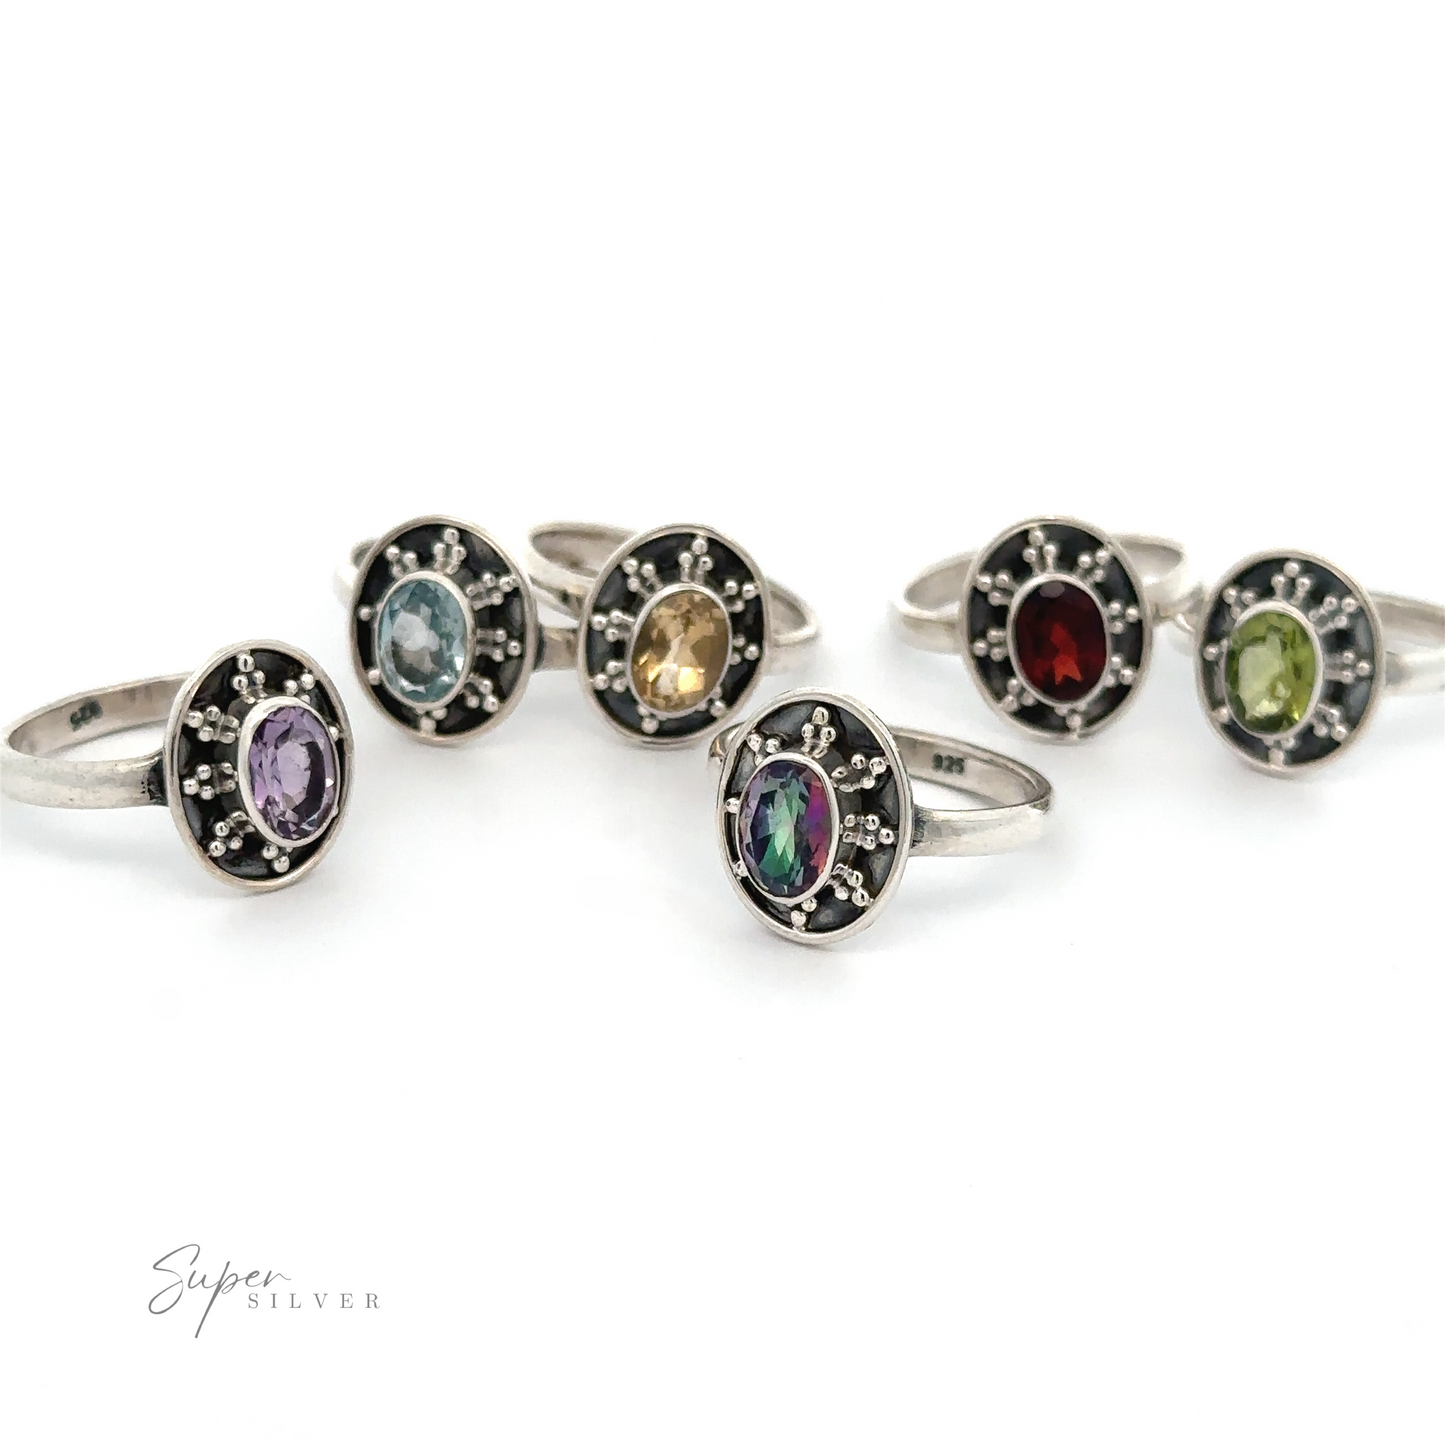 Six Oval Gemstone Rings with Ball and Disk Border in different colors (purple, blue, yellow, red, green) set in circular black bases are arranged in two rows. The words "Super Silver" are in the bottom left corner. These vintage-inspired jewelry pieces add a touch of elegance to any ensemble.